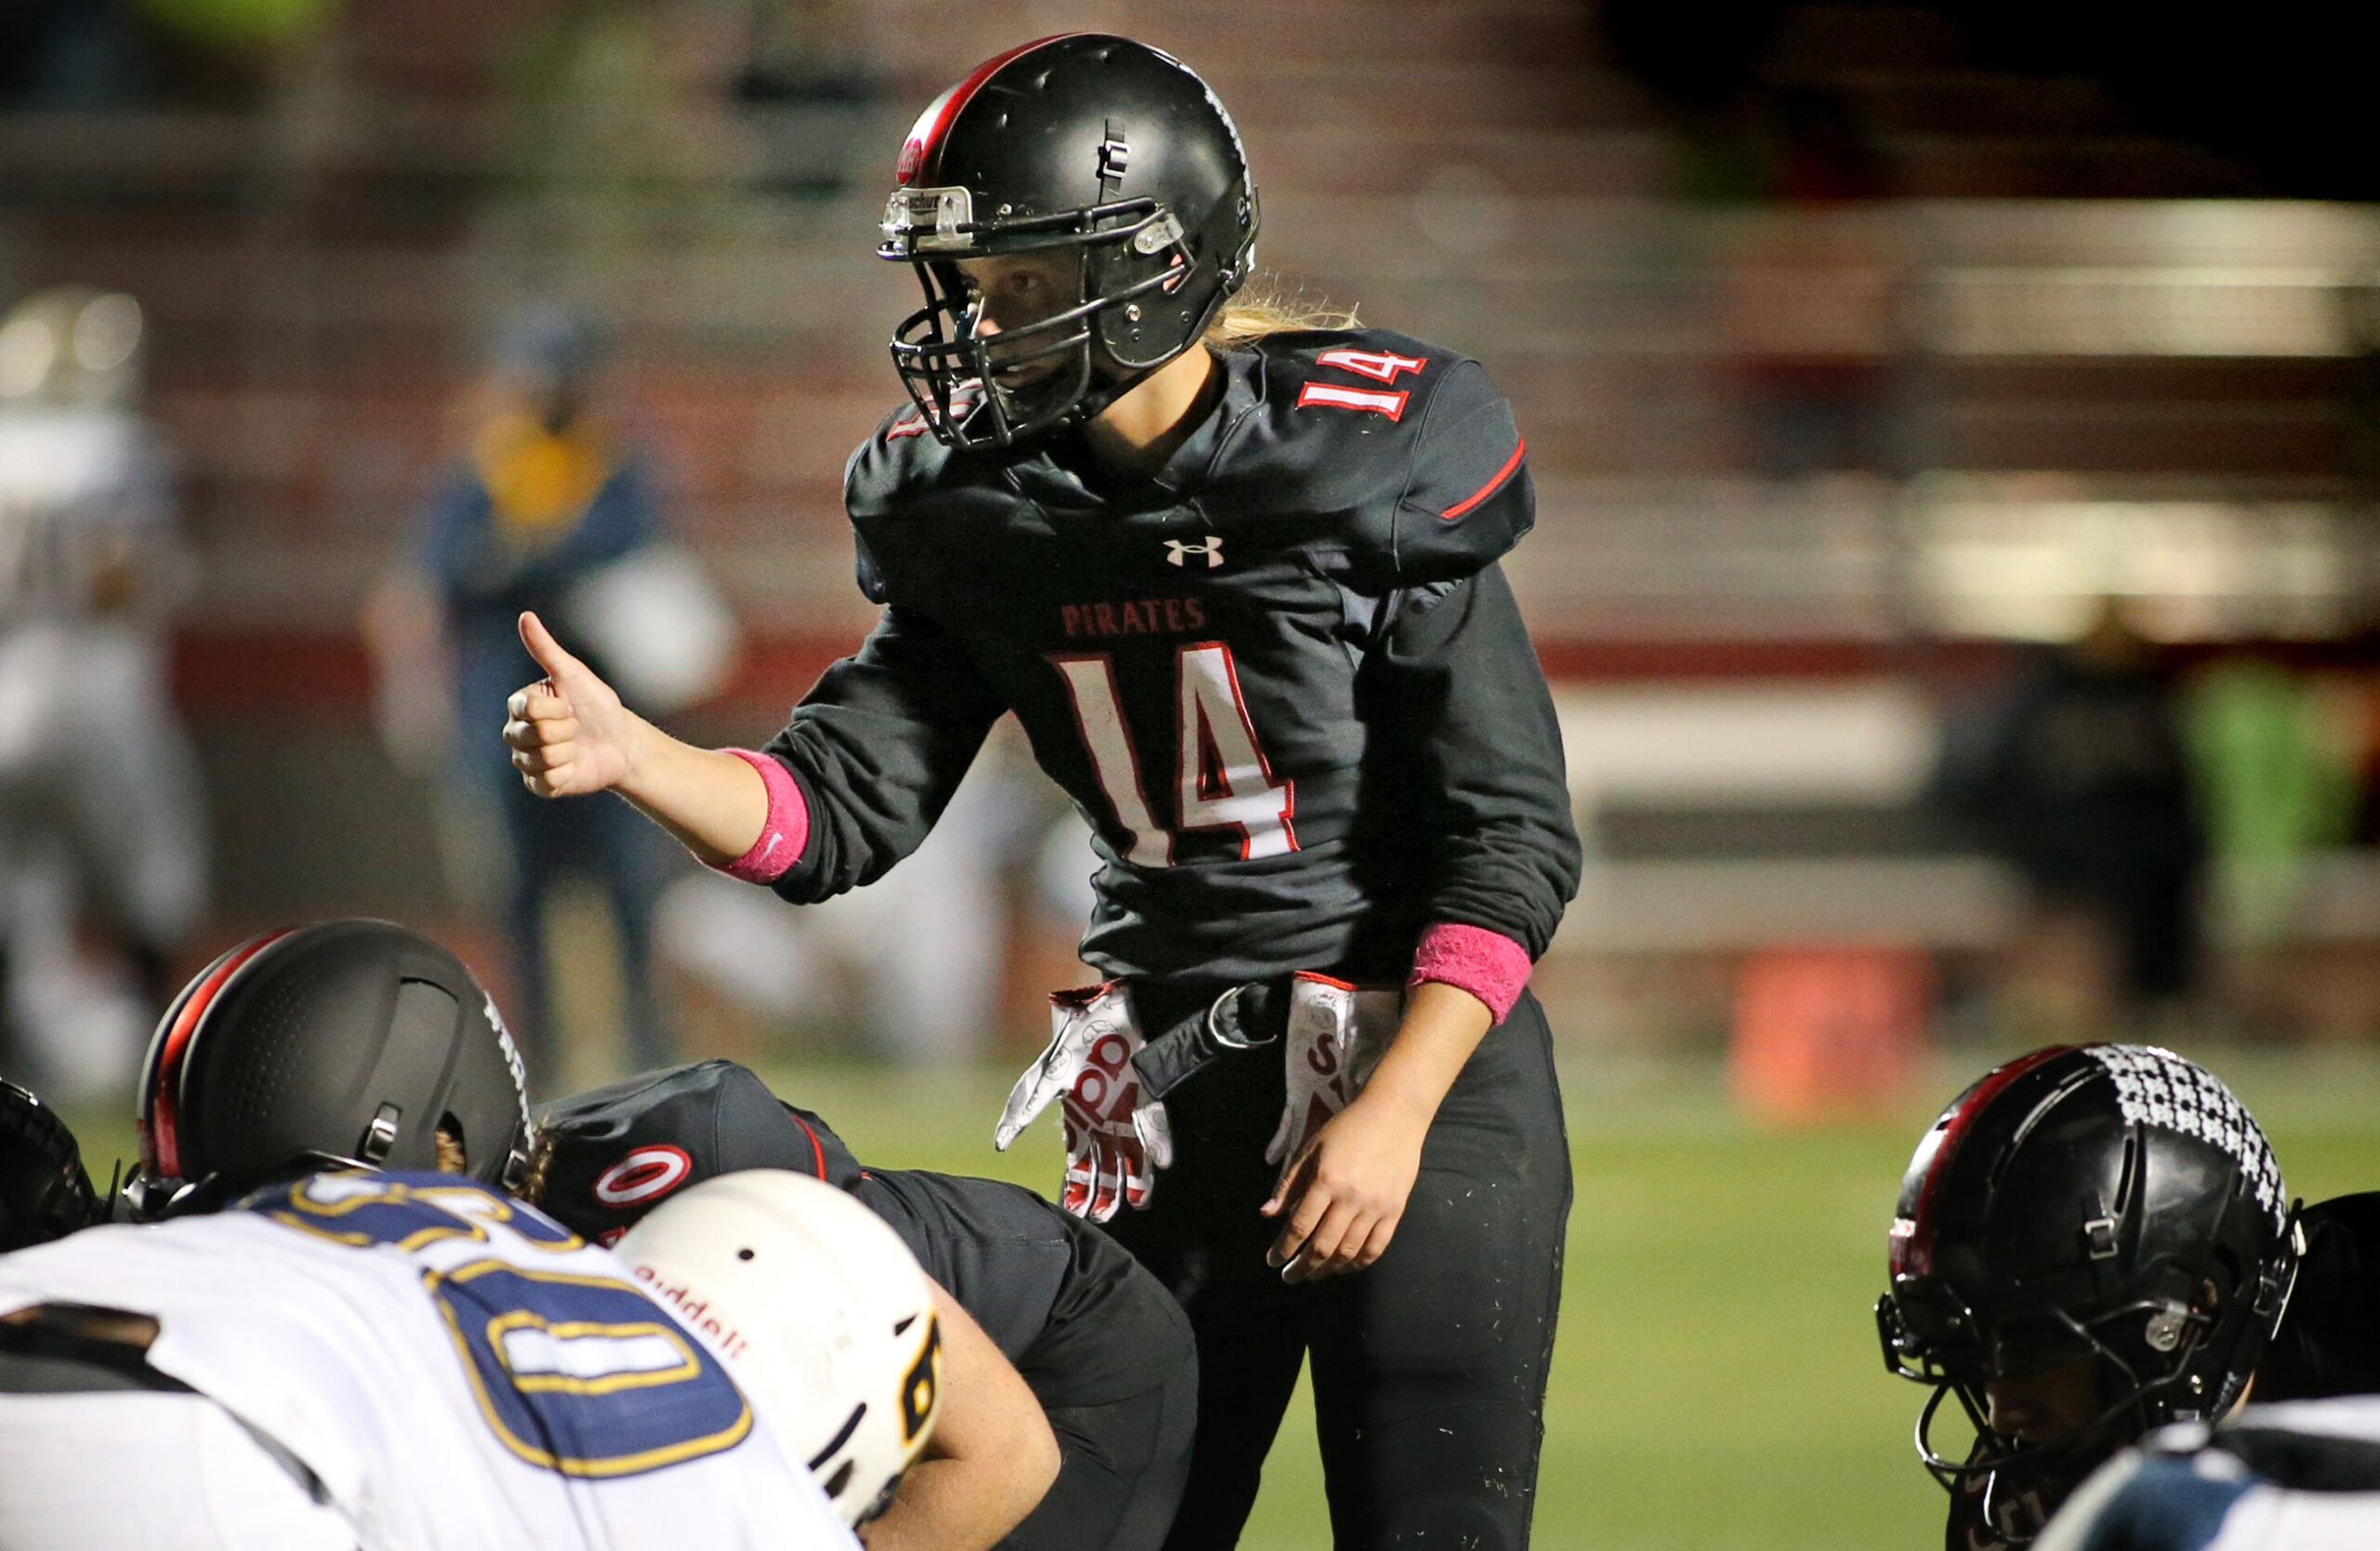 Ava Matz wears a black football uniform and helmet as she signals to teammates before a play.